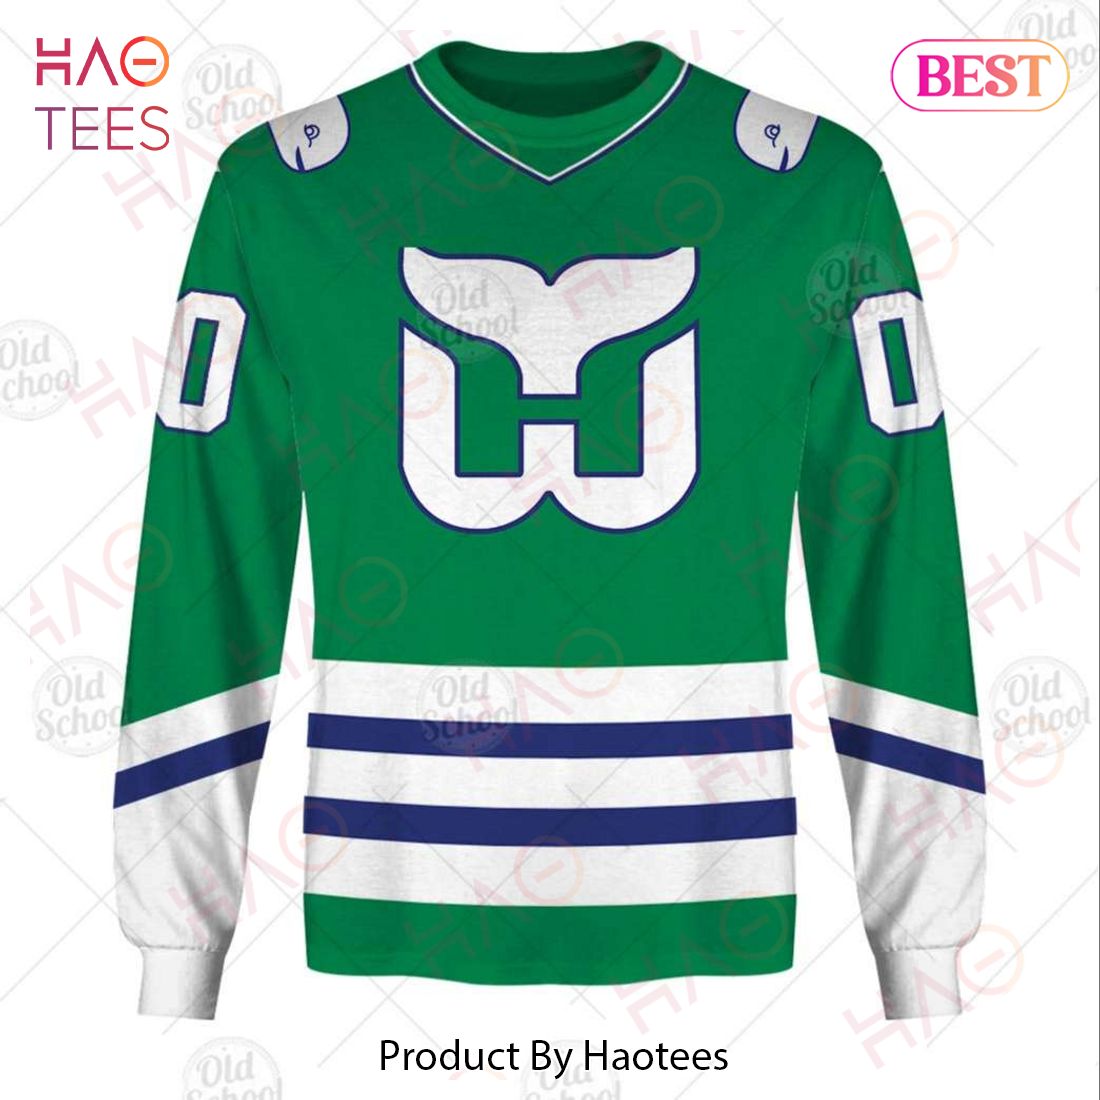 Hurricanes to wear throwback Whalers jerseys